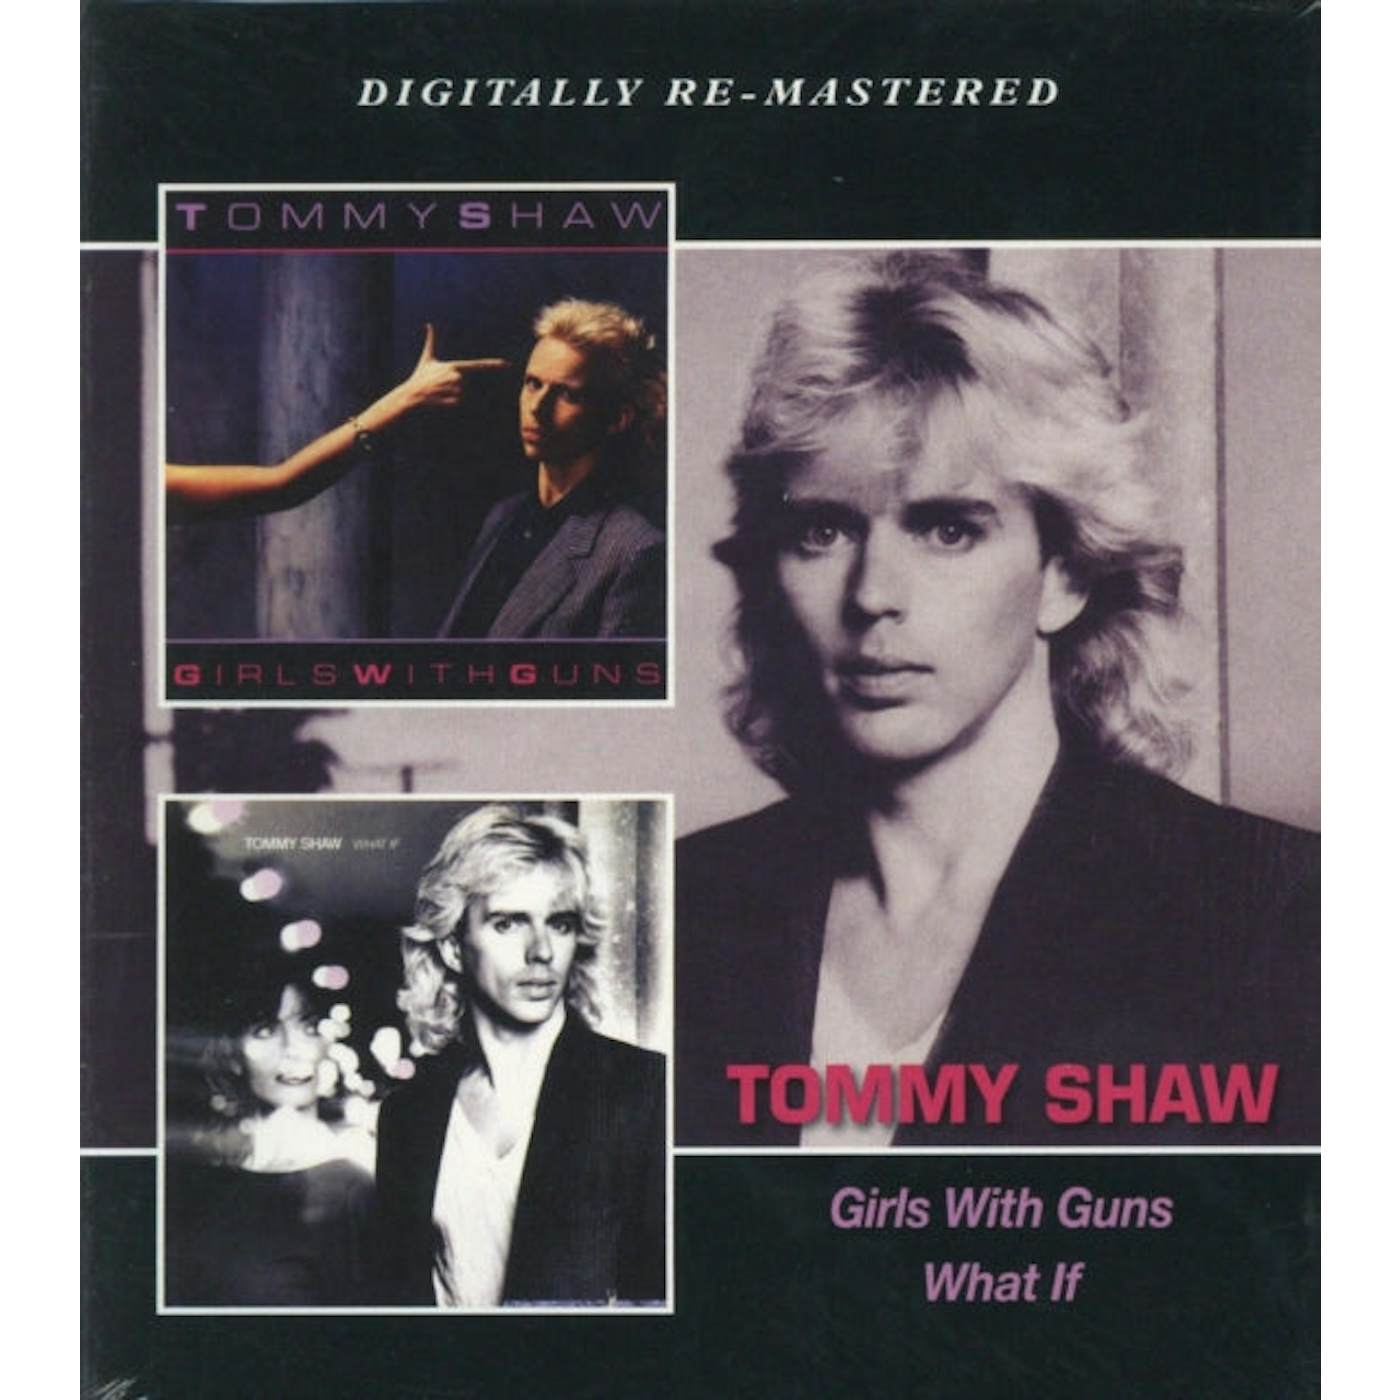 Tommy Shaw CD - Girls With Guns/What If